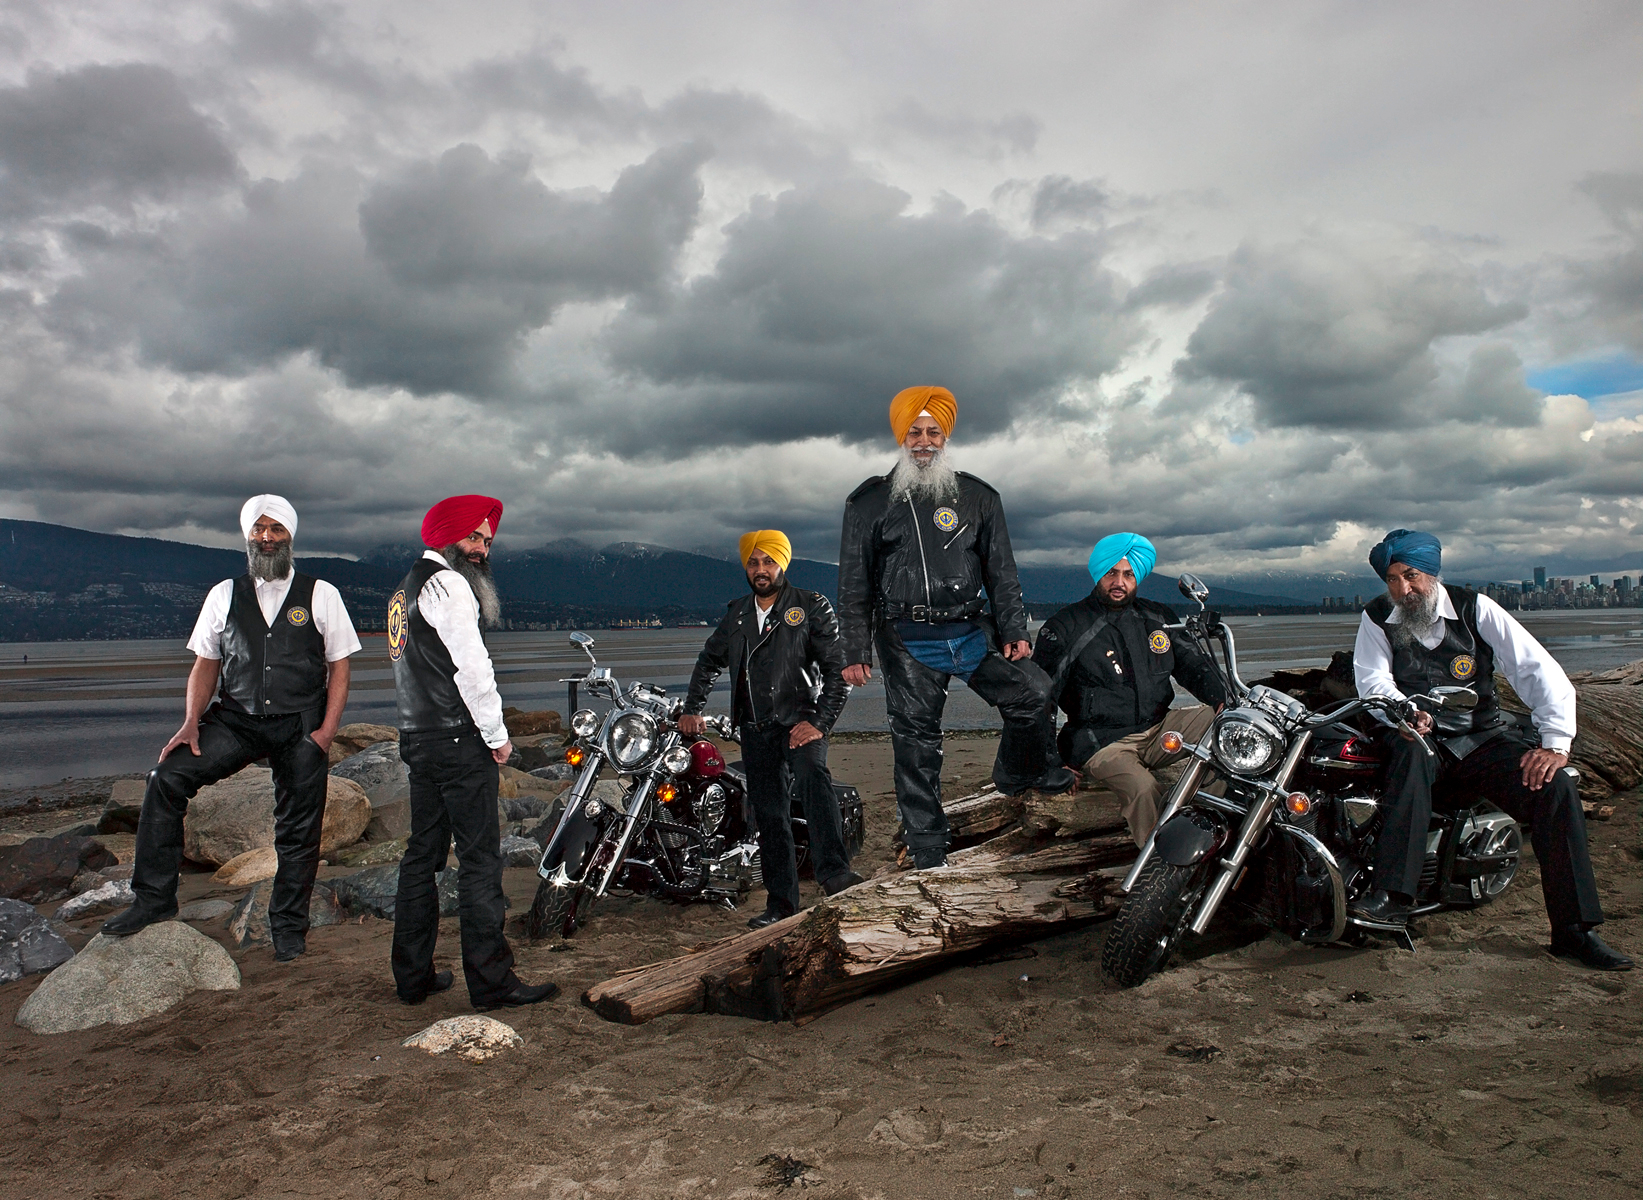     Naomi Harris, Sikh Motorcycle Club, Vancouver, British Columbia, March 2012. 

